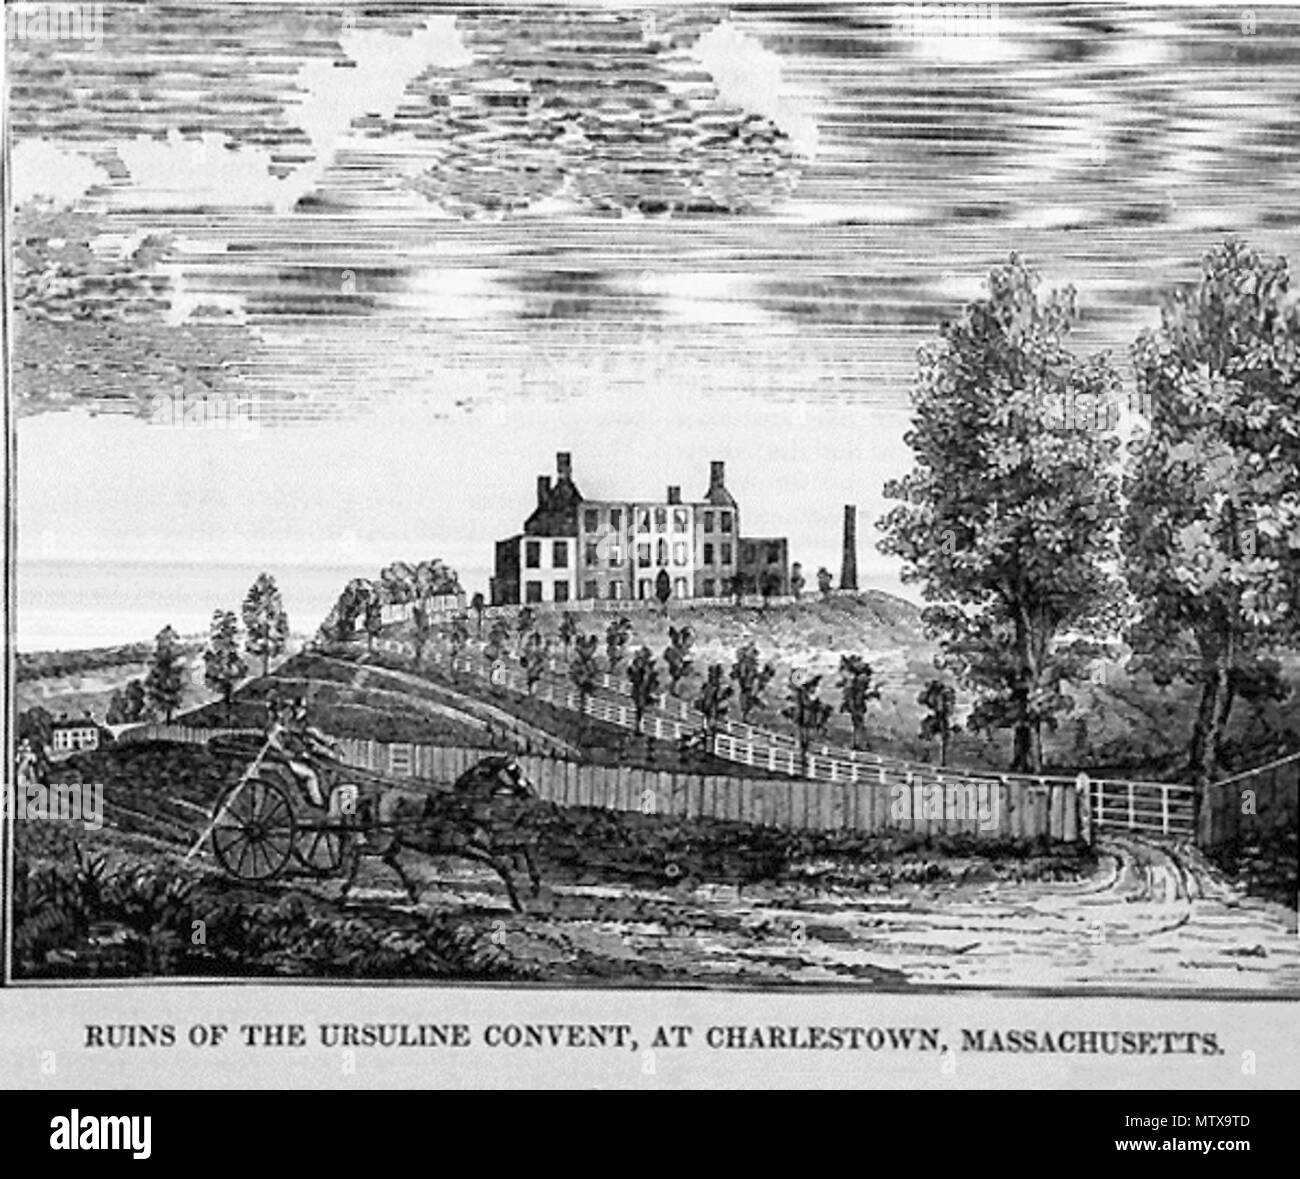 . English: 'Ruins of the Ursuline Convent, at Charlestown Massachusetts,' (Ursuline Convent Riots of August 11 & 12, 1834) wood engraving (print), original in the collection of the Charlestown (Massachusetts) Historical Society, USA . 1834. unidentified artist, historical print 532 Ruins of Ursuline Convent 1834 Riots Stock Photo